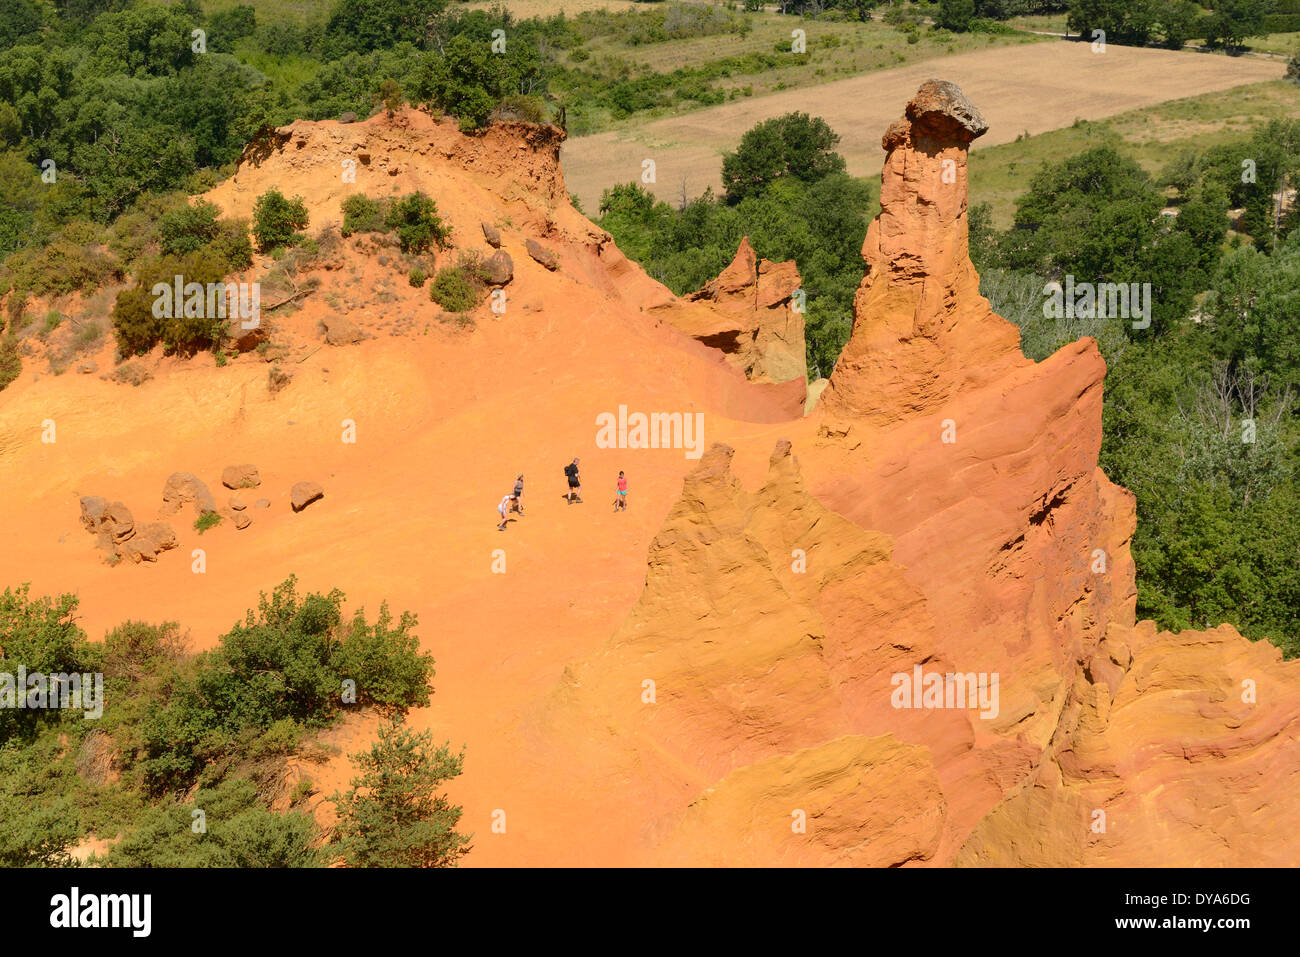 Europe, Roussillon, Vaucluse, Provence, France, ochre, rock, red, village, nature Stock Photo